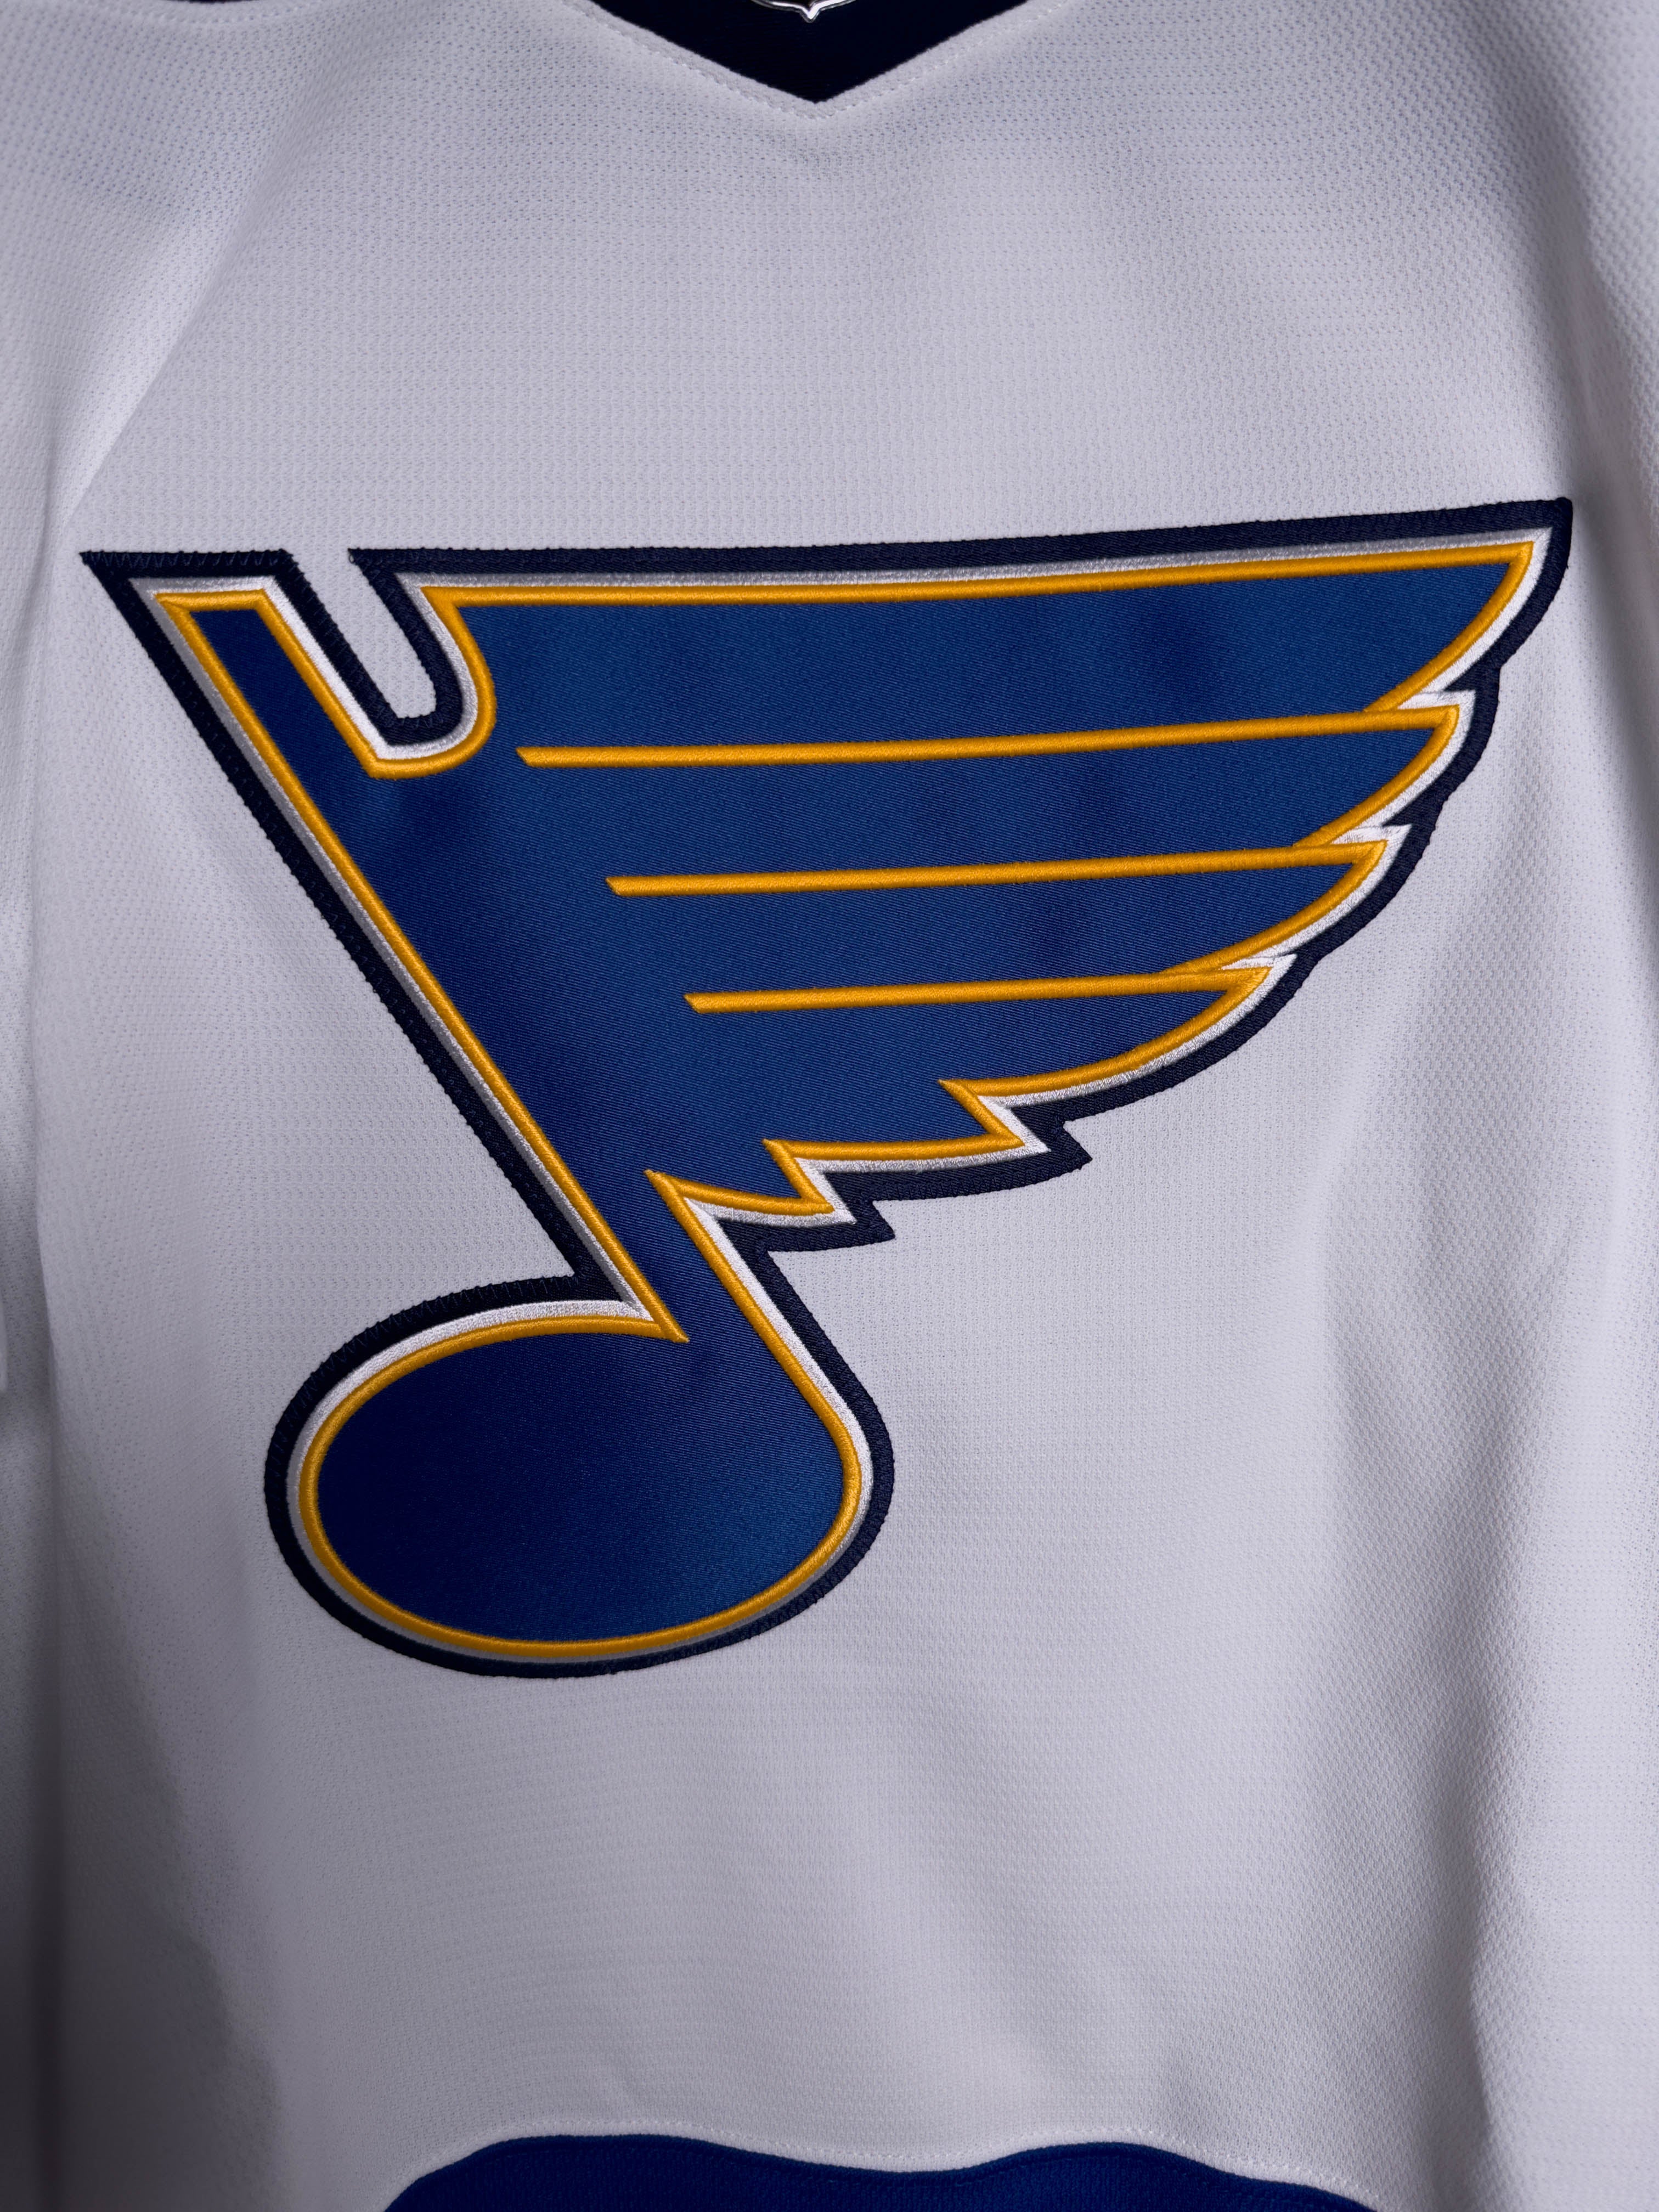 St. Louis Blues NHL Adidas MiC Team Issued Home Jersey Size 52 (Player Size)